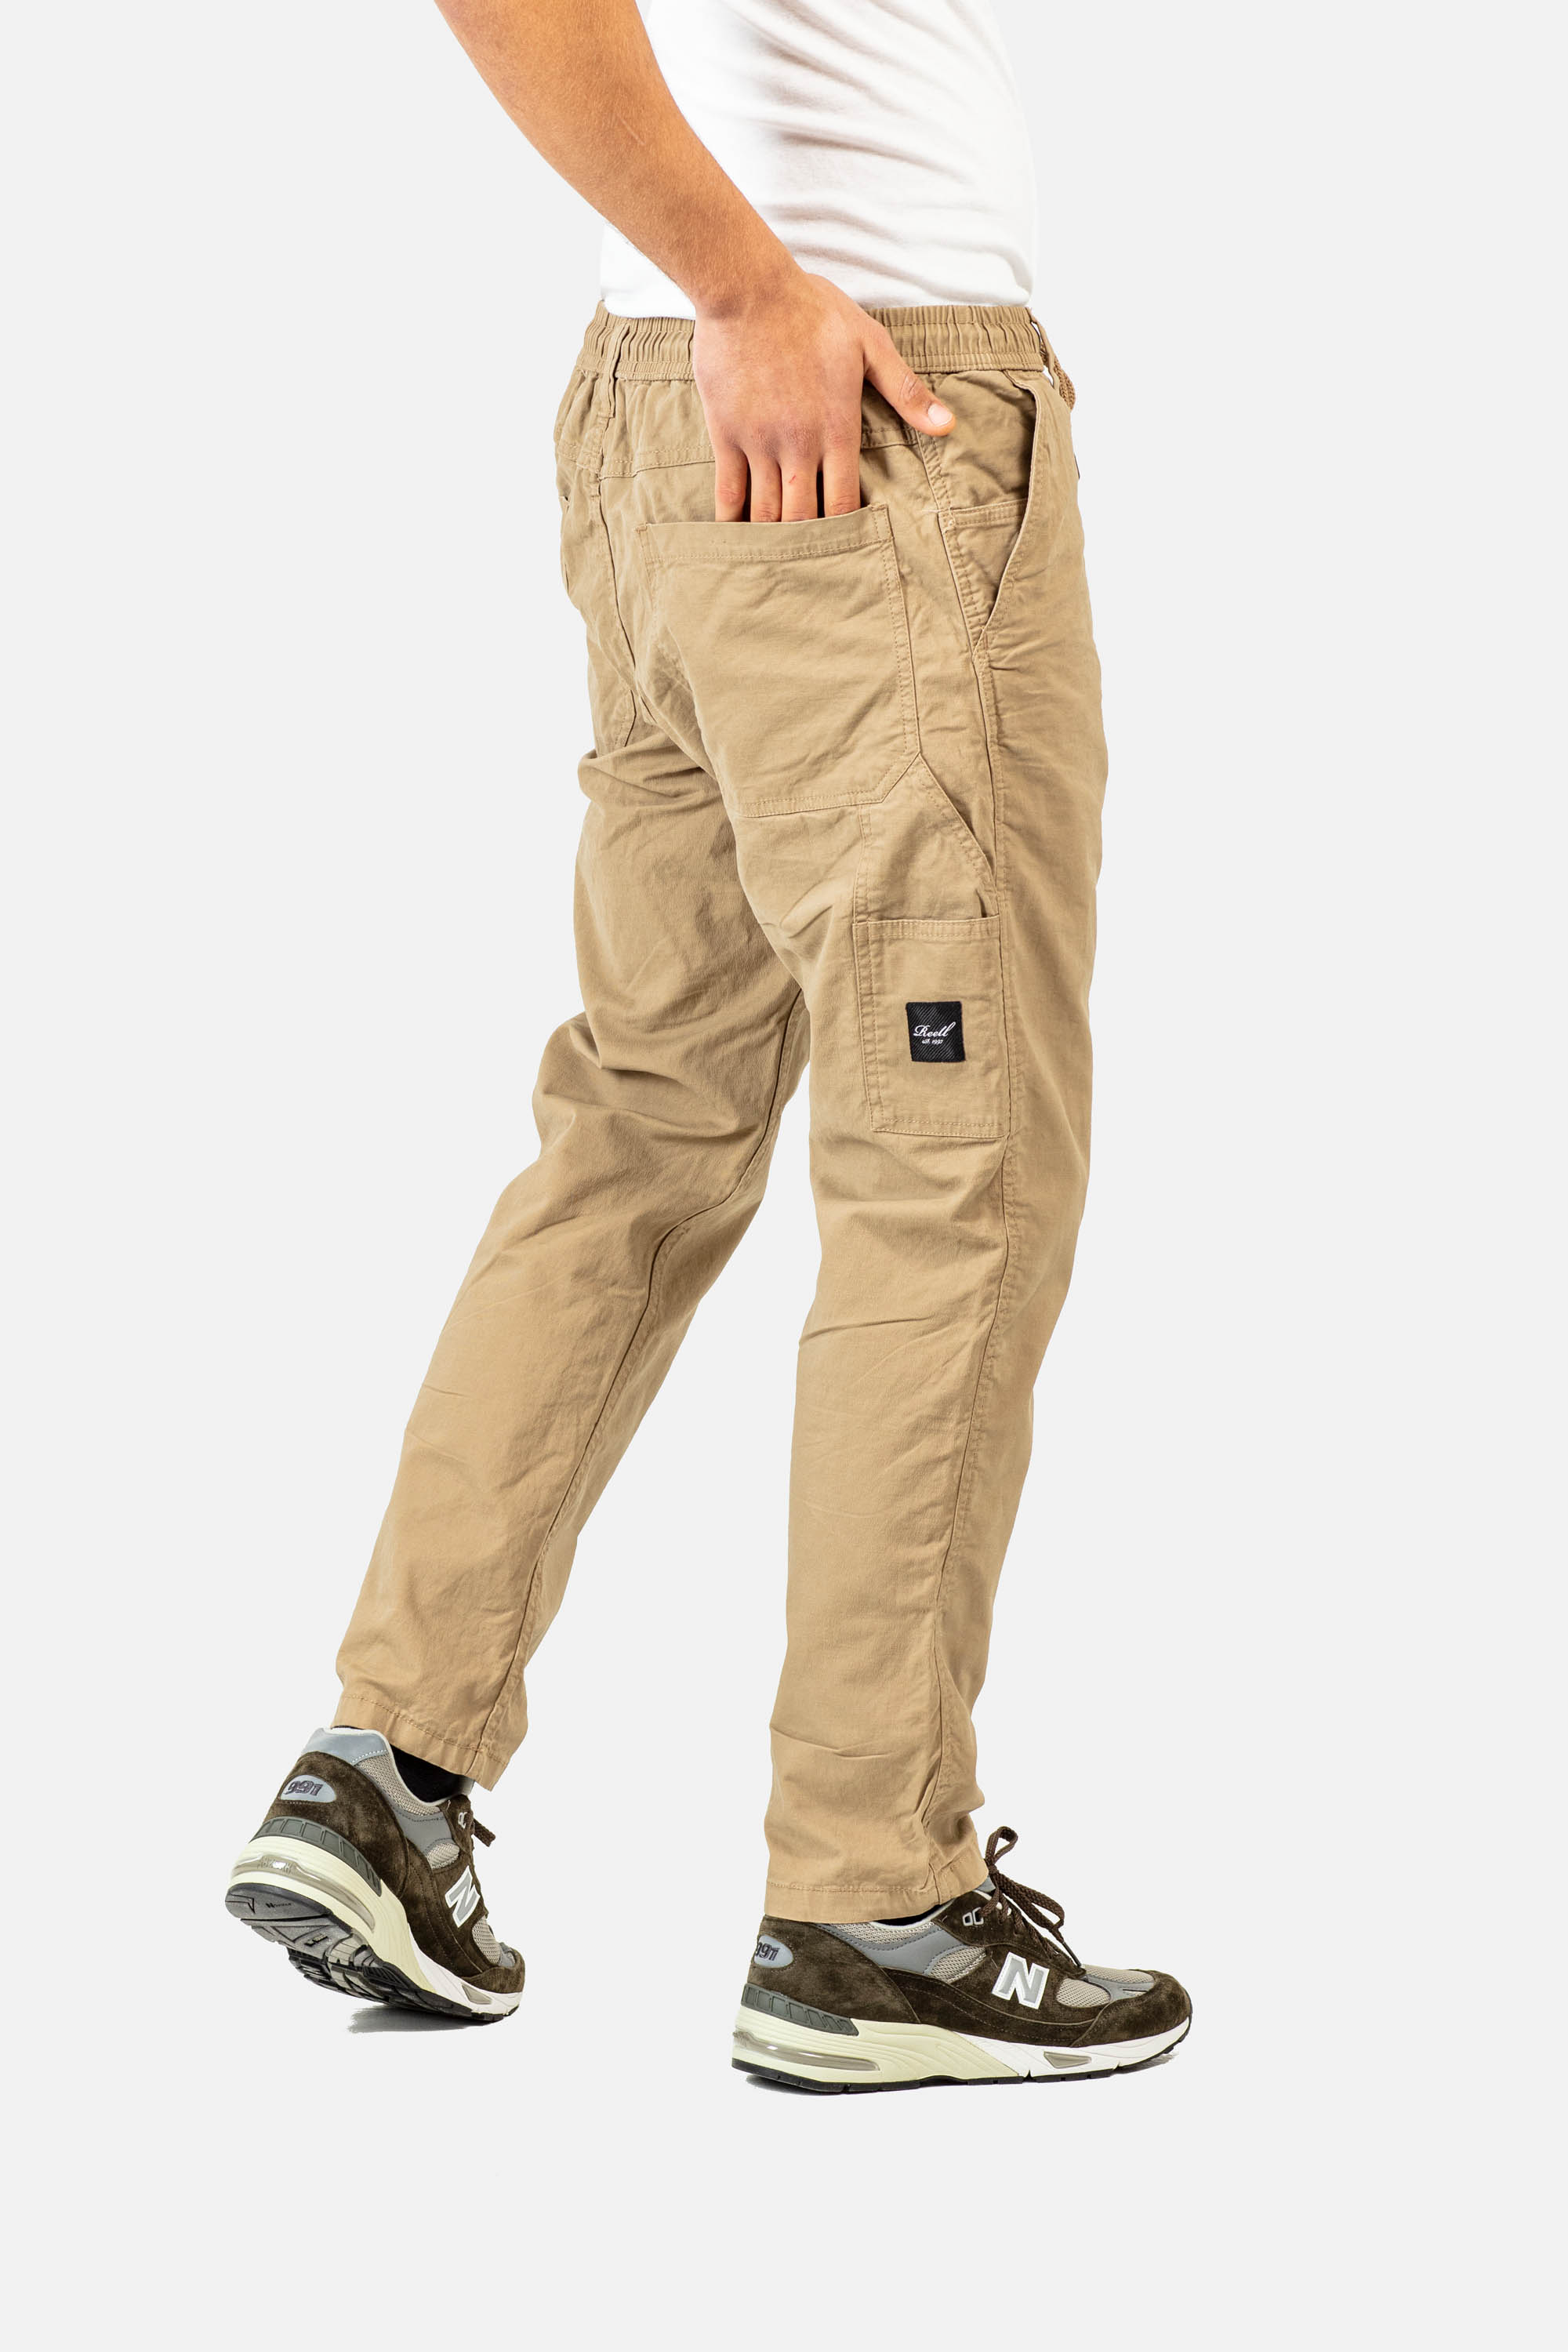 Reflex Easy Worker LC Dark Sand REELL-SHOP | The Official Reell Online Shop